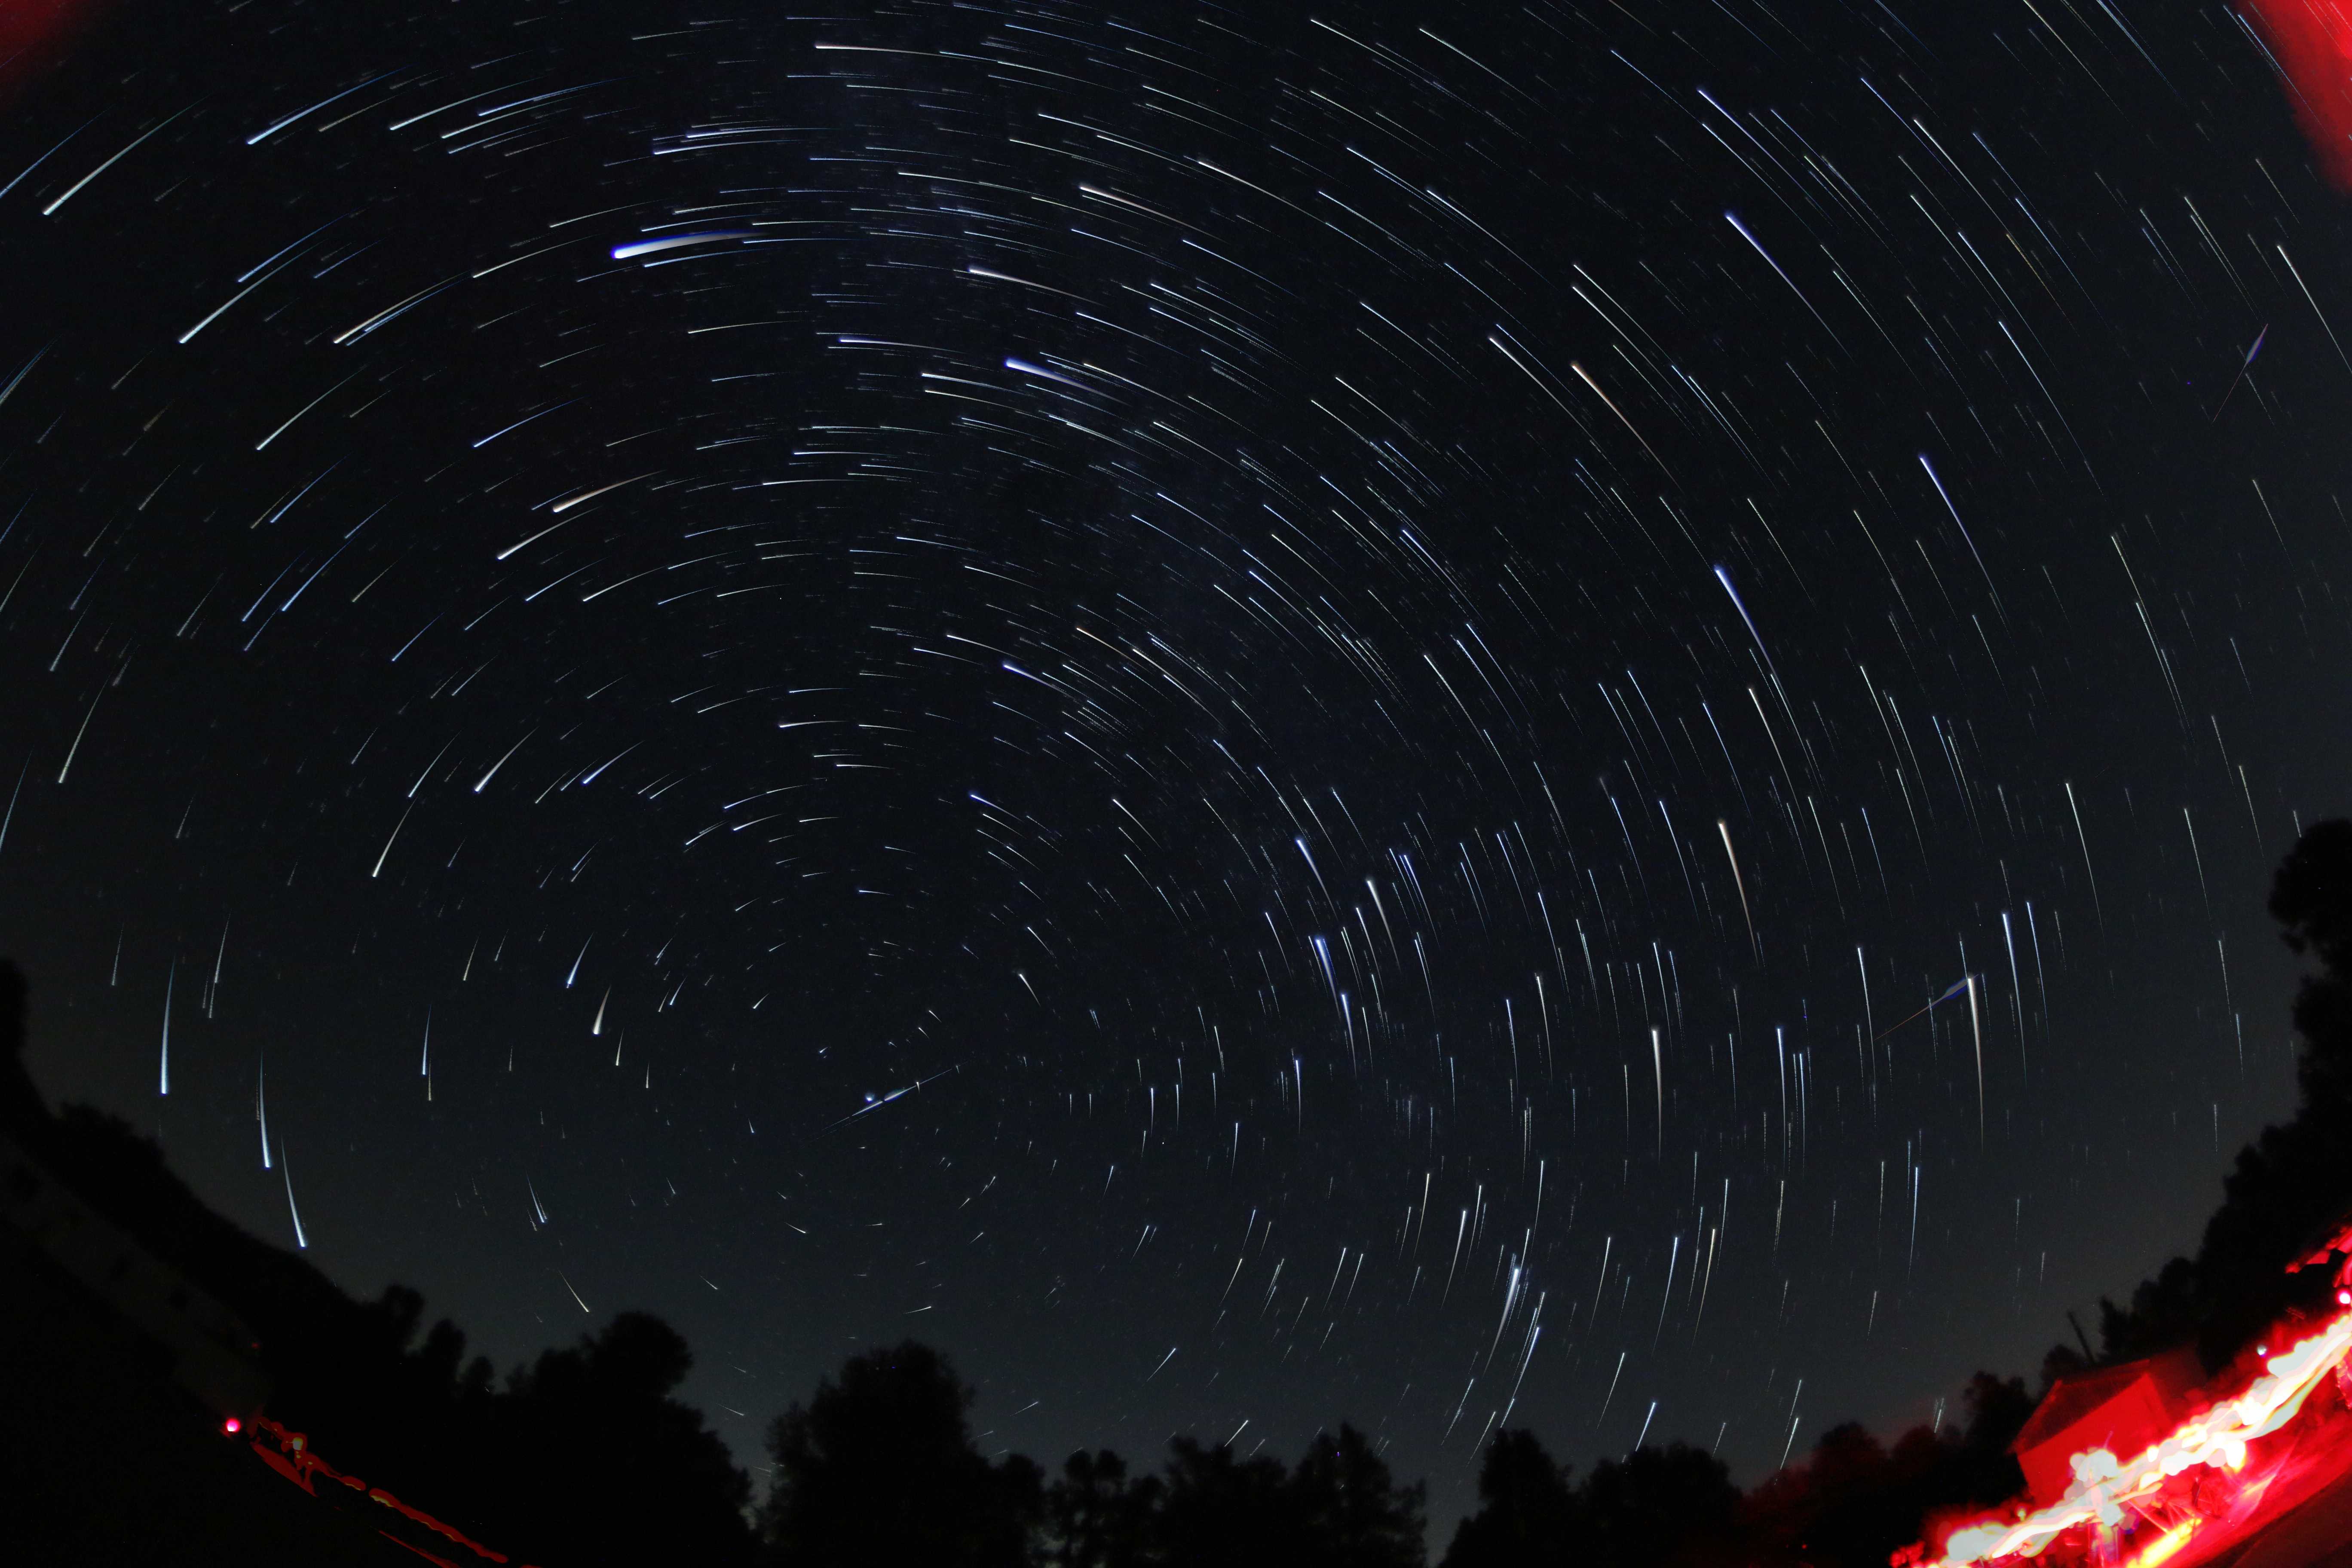 In this long-exposure photo of the night sky, a few oddball star trails don't follow the same circular path around Polaris, the North Star. That's because these are not actually stars but shooting stars, or meteors that fell from space during the Perseid meteor shower, which peaked in mid-August. Astrophotographer Maxim Senin captured this photo from the Los Angeles Astronomical Society dark-sky site in Los Padres National Forest.